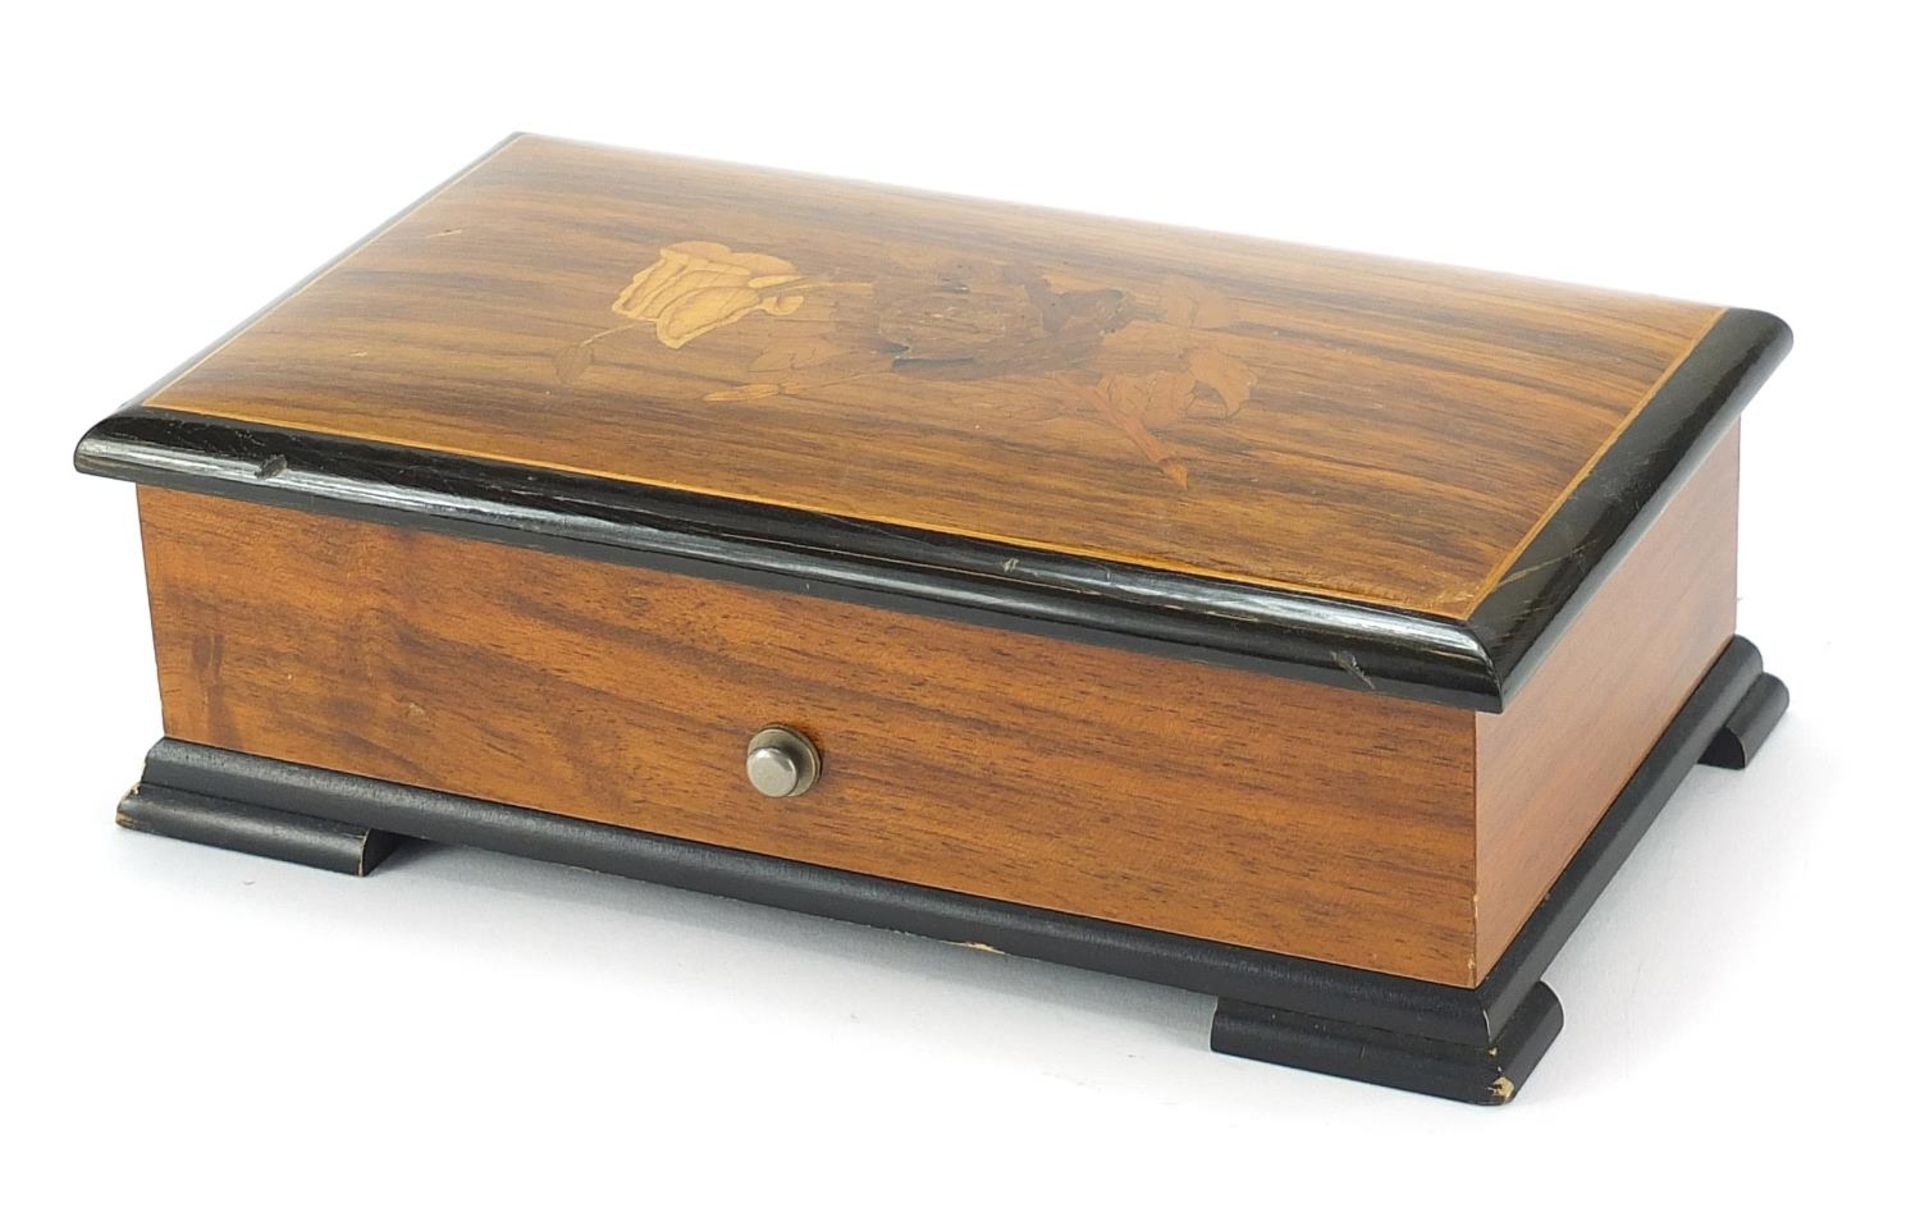 Thorens Swiss music box housed in an inlaid wooden case, 8cm H x 22.5cm W x 13cm D - Image 4 of 5